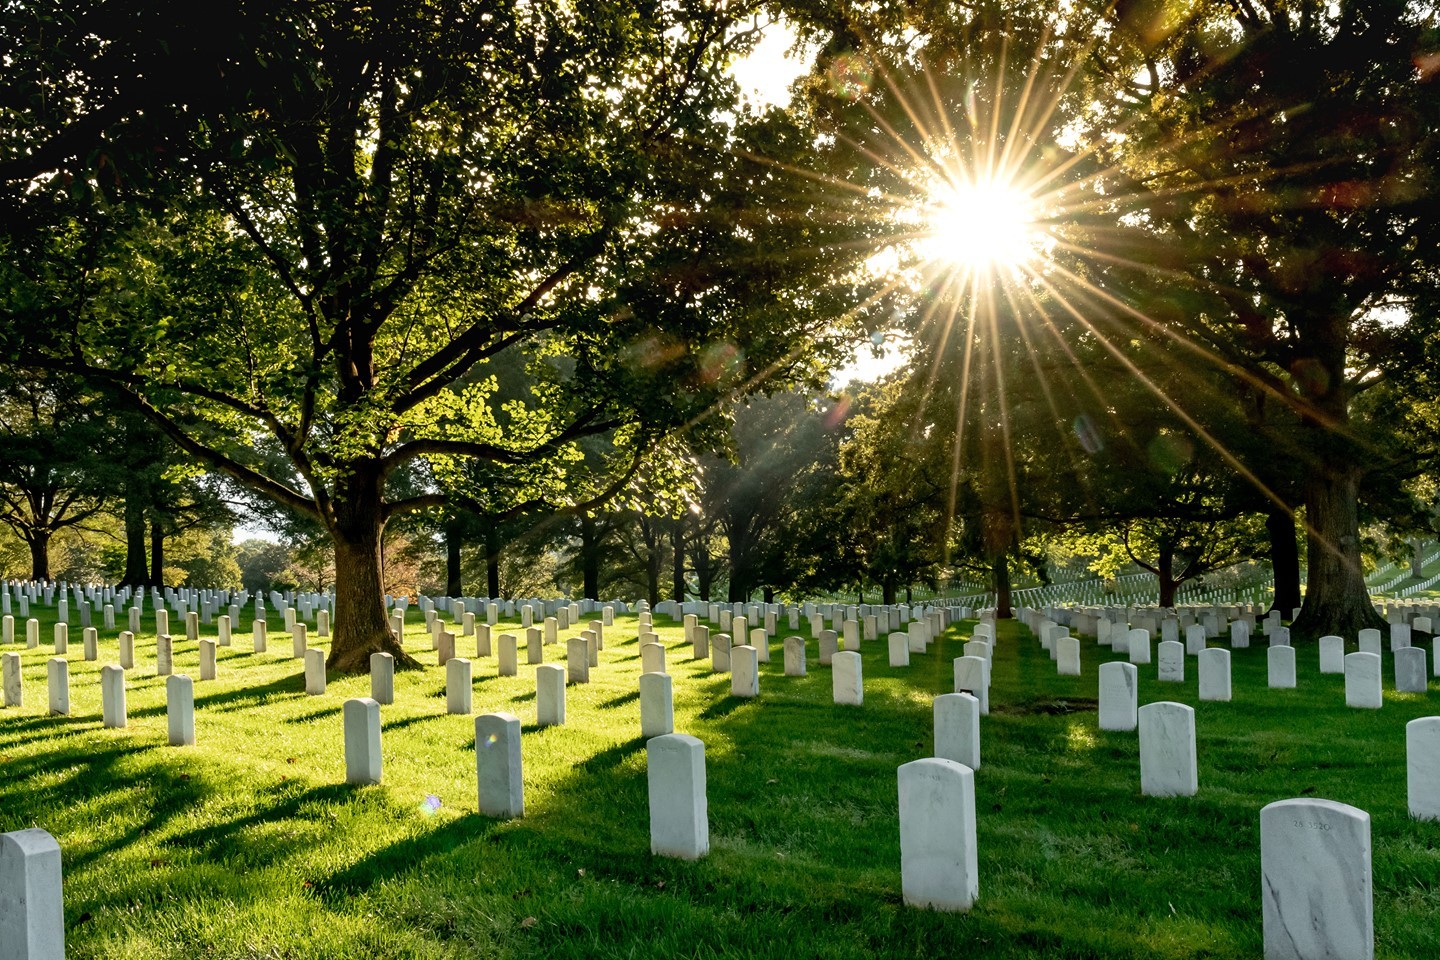 The sun peaks through the trees over rows and rows of white glistening headstones at Arlington National Cemtery.